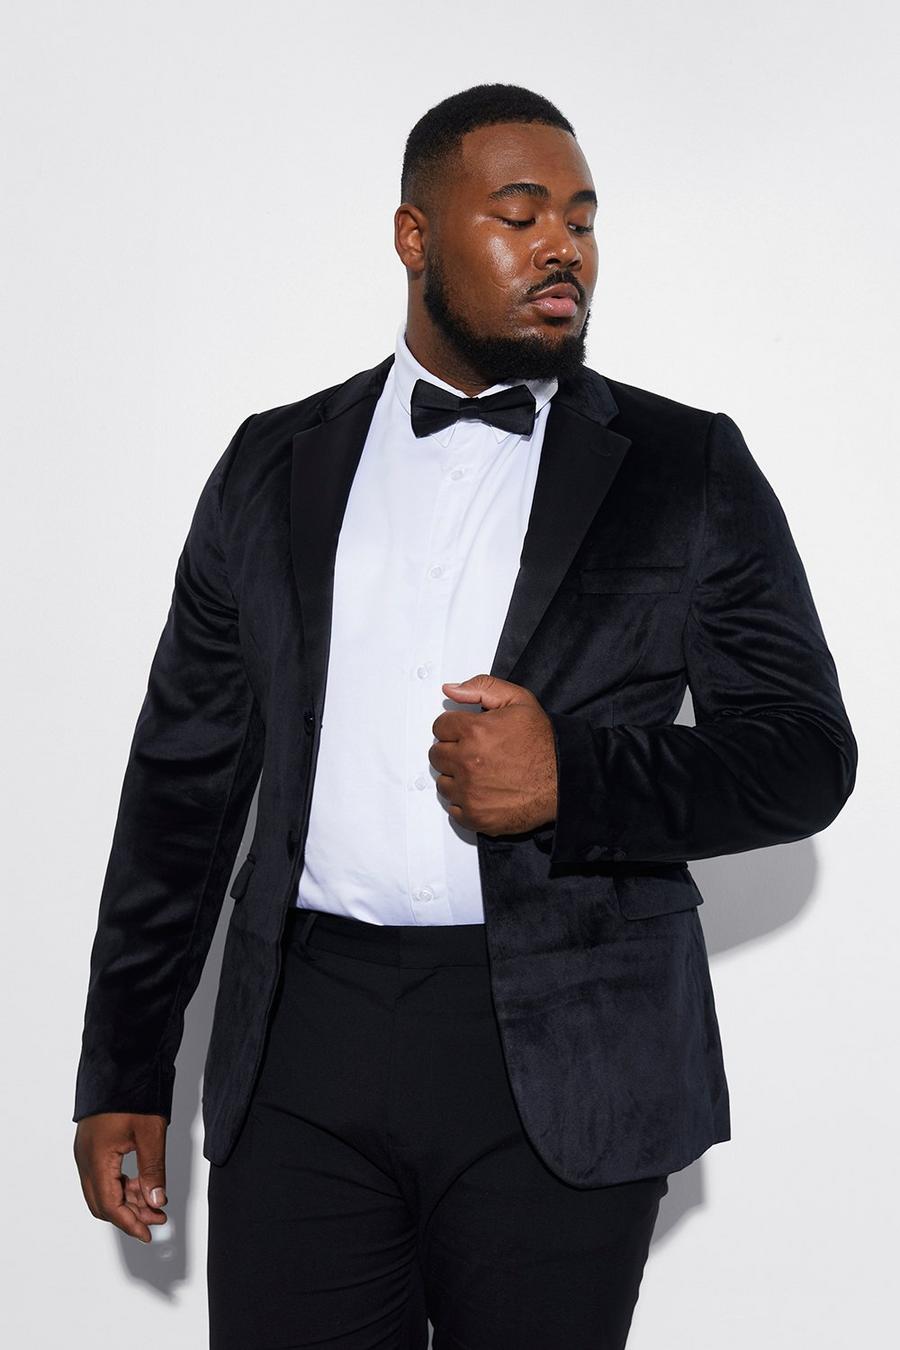 Big and Tall Black Suits - Big and Tall Tuxedo Dinner Jacket